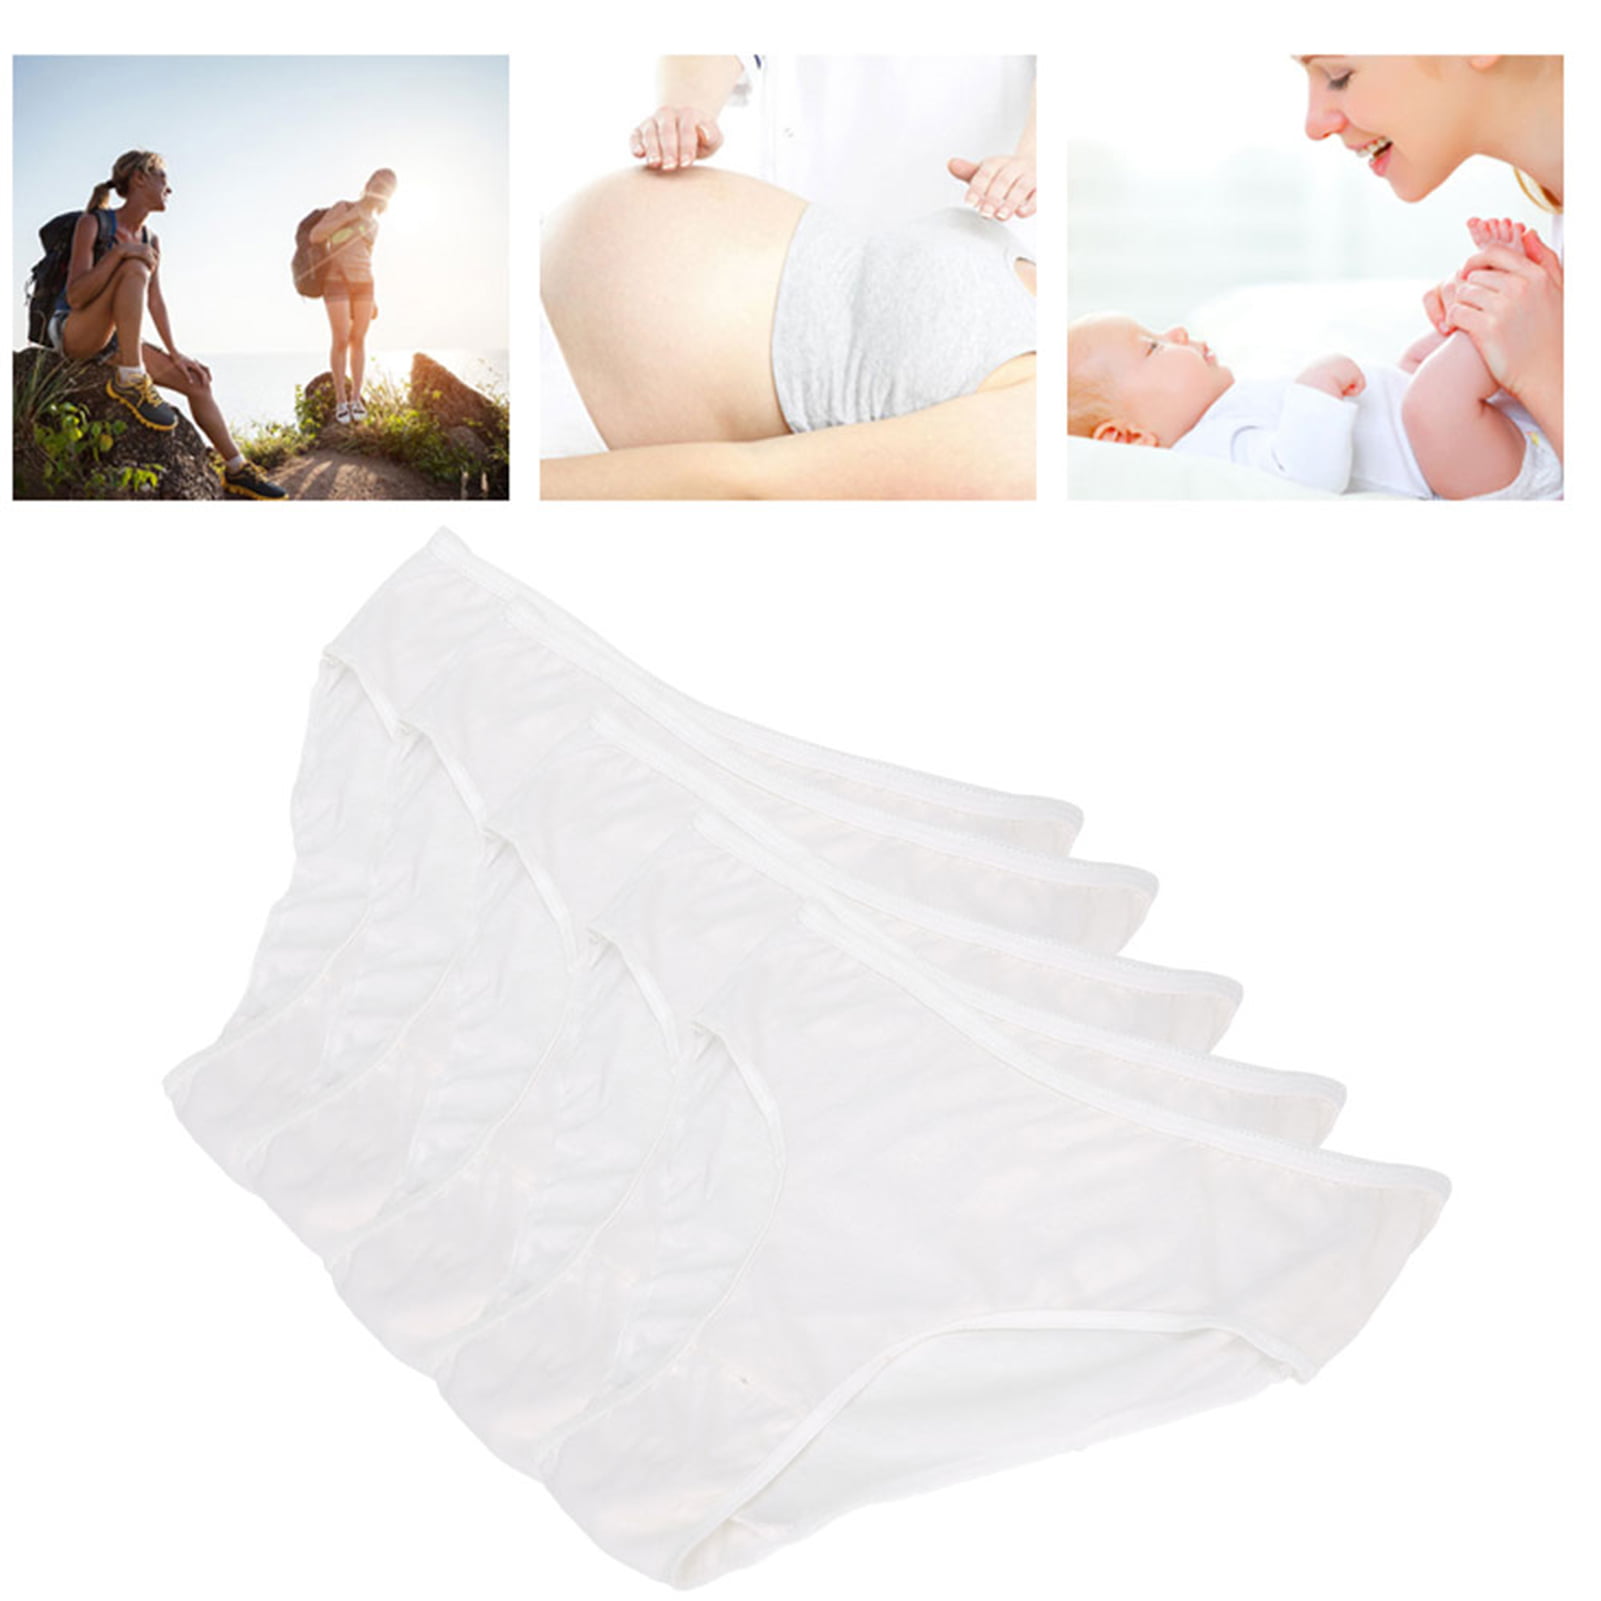 1pc) Disposable Maternity Panties (L-XXL) 1 Time Use Maternity